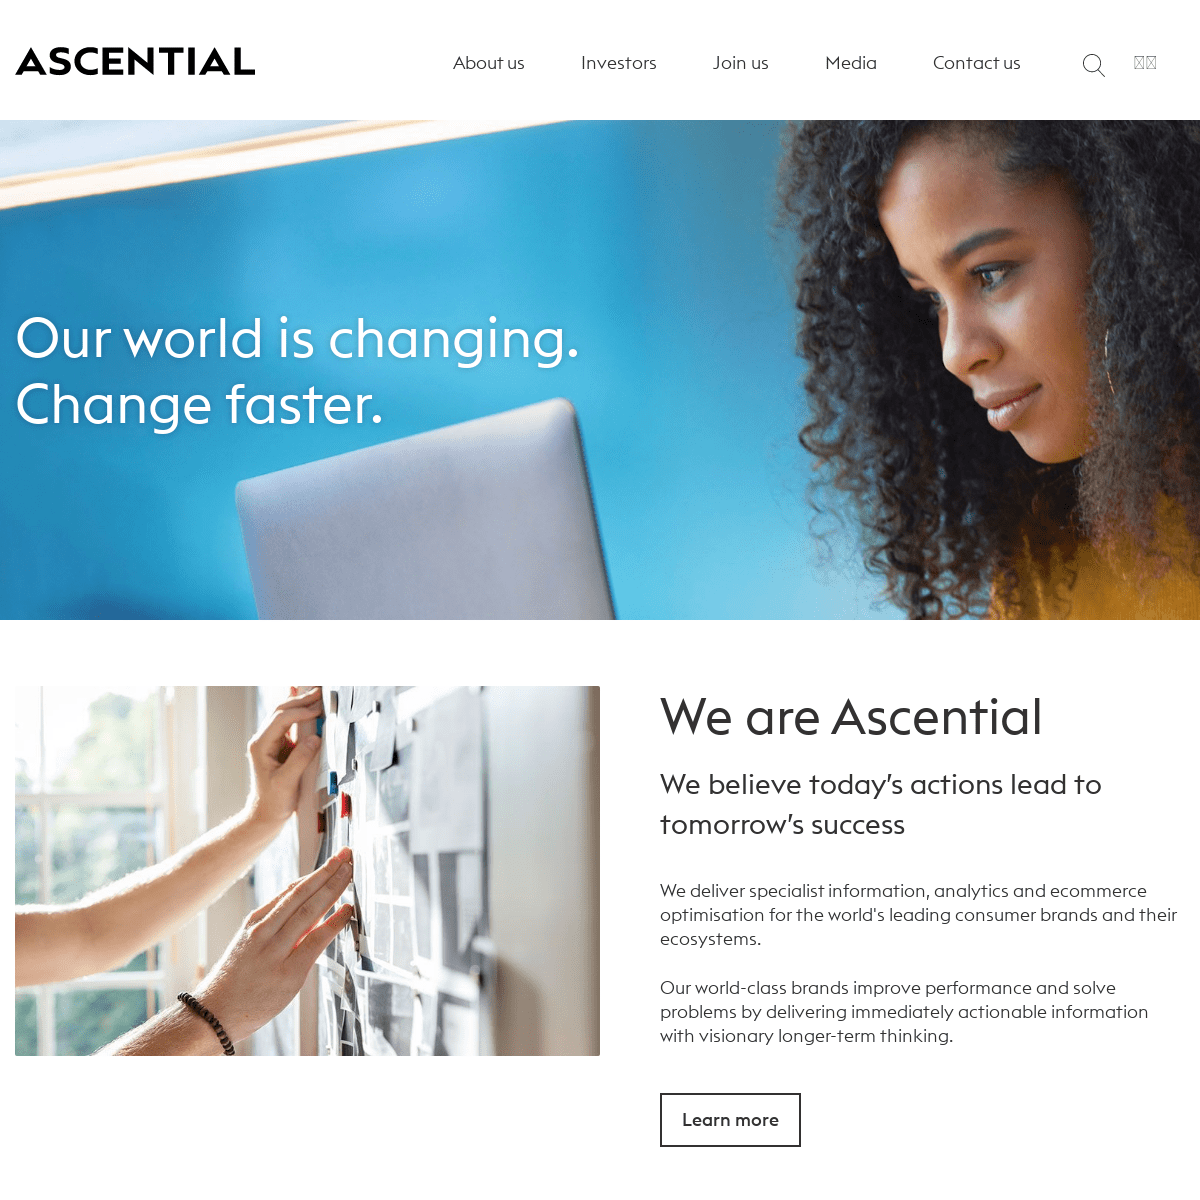 A complete backup of https://ascential.com